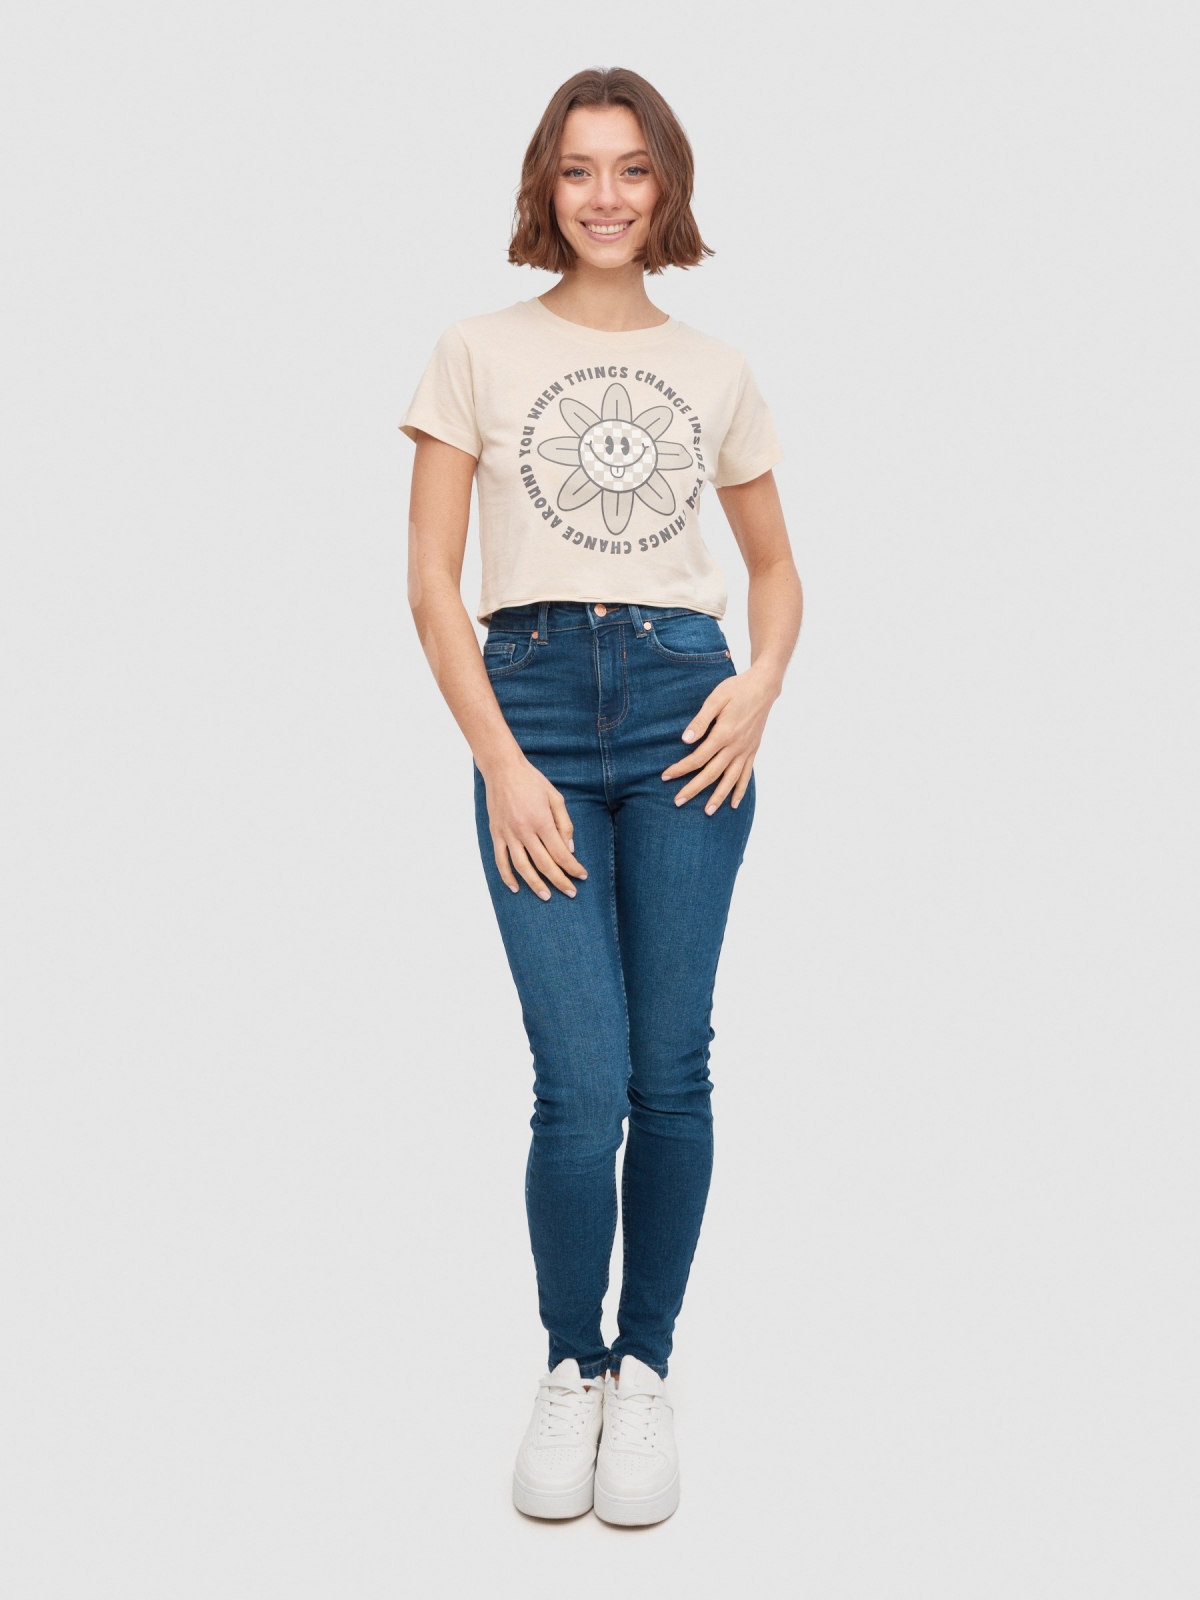 Smile crop t-shirt sand front view